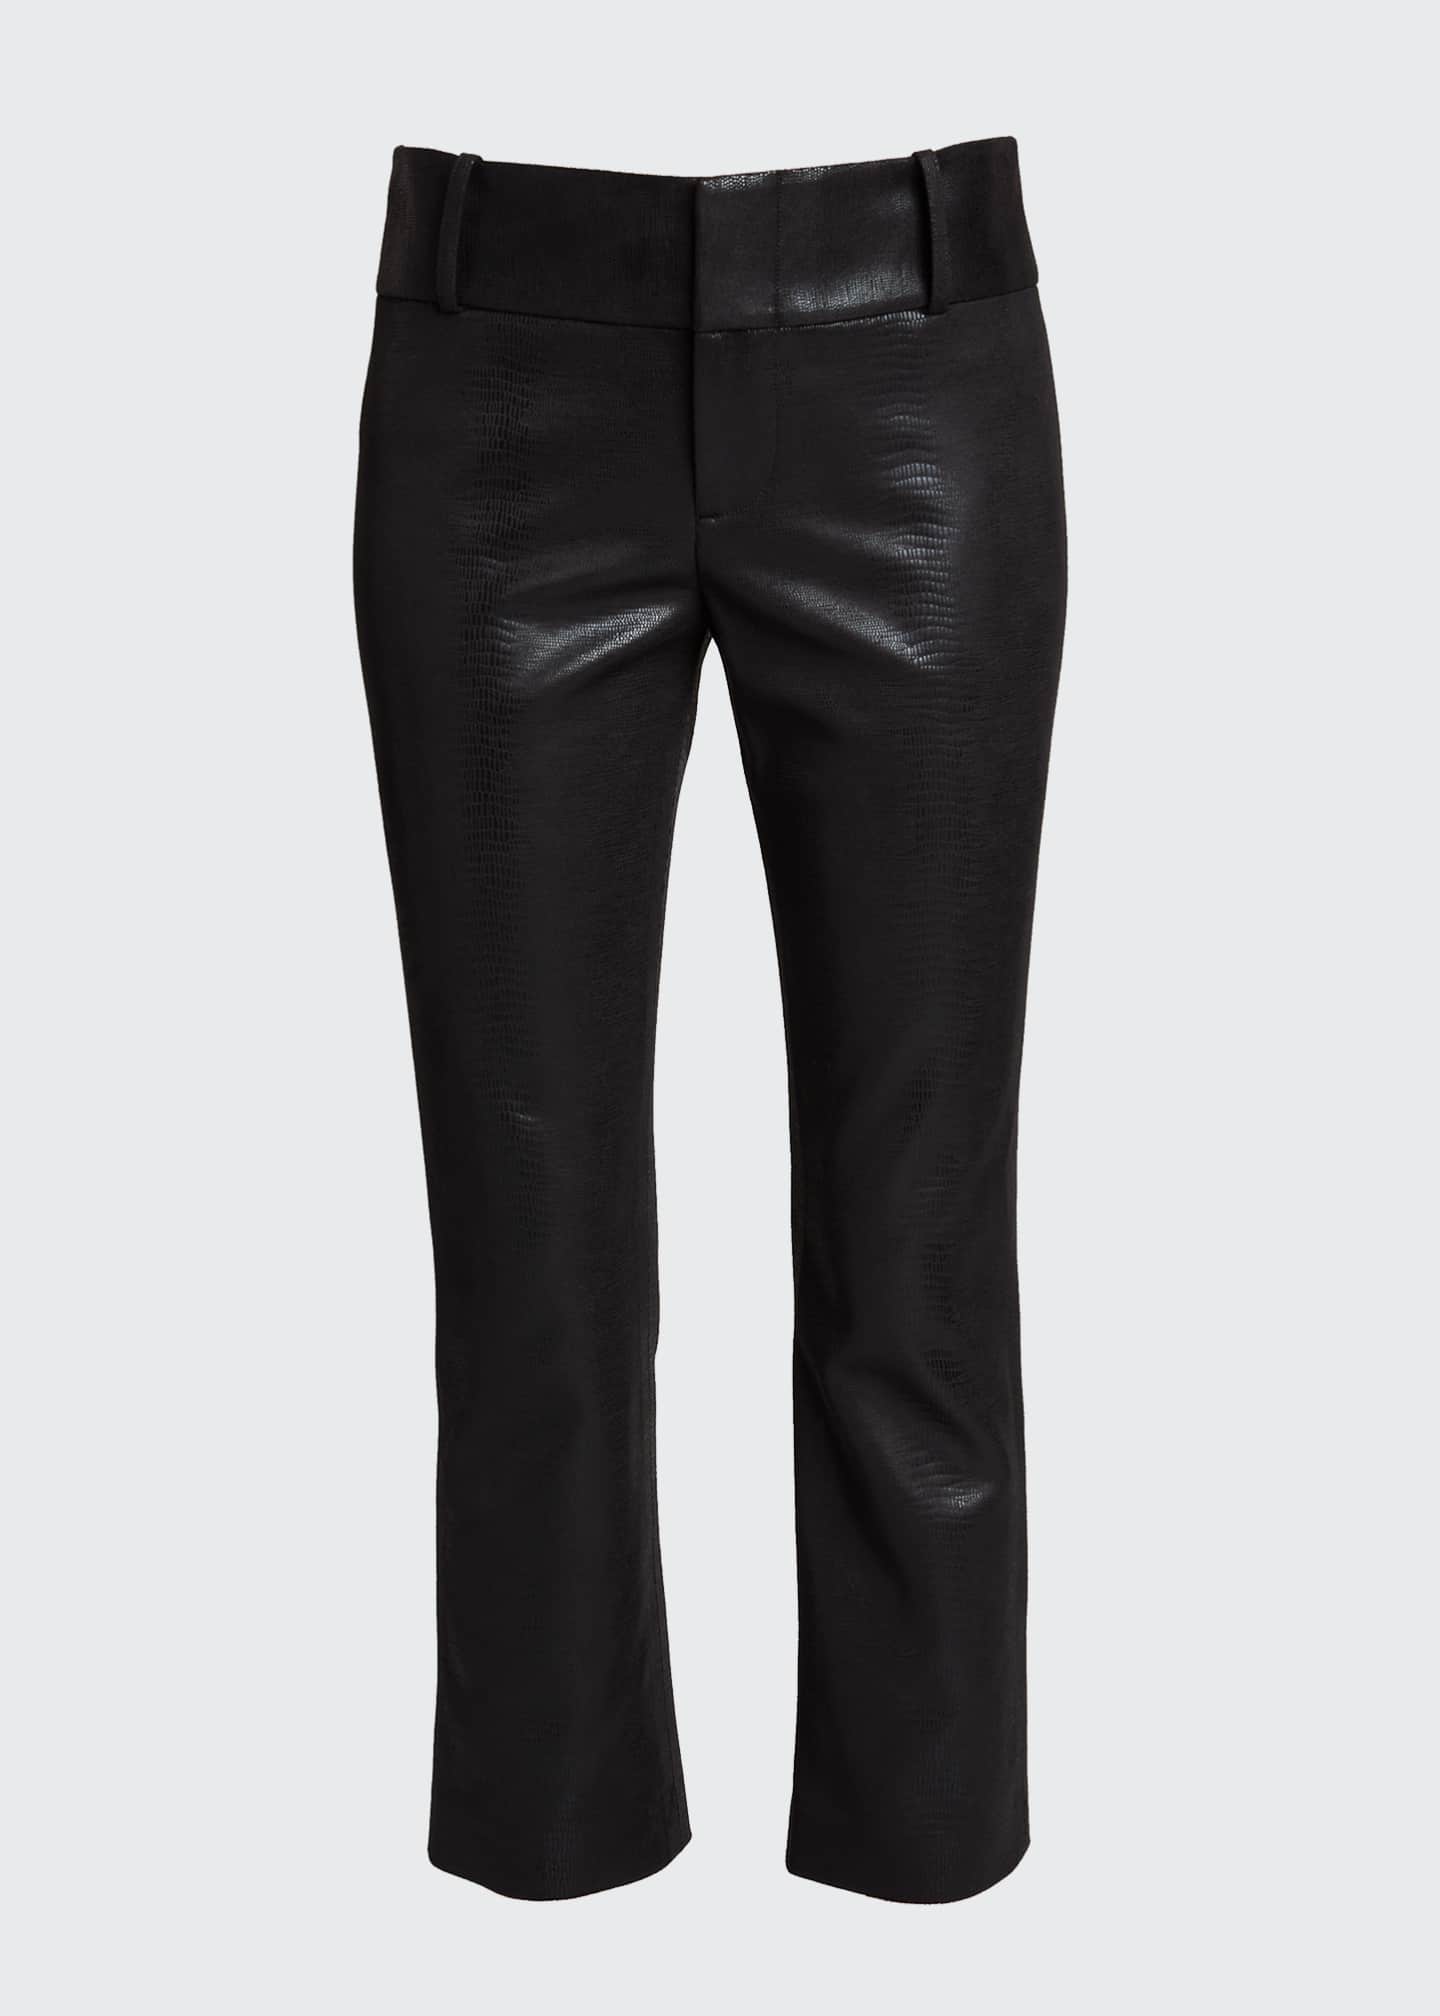 Alice + Olivia Stacey Faux-Leather Slim Cropped Pants - Bergdorf Goodman